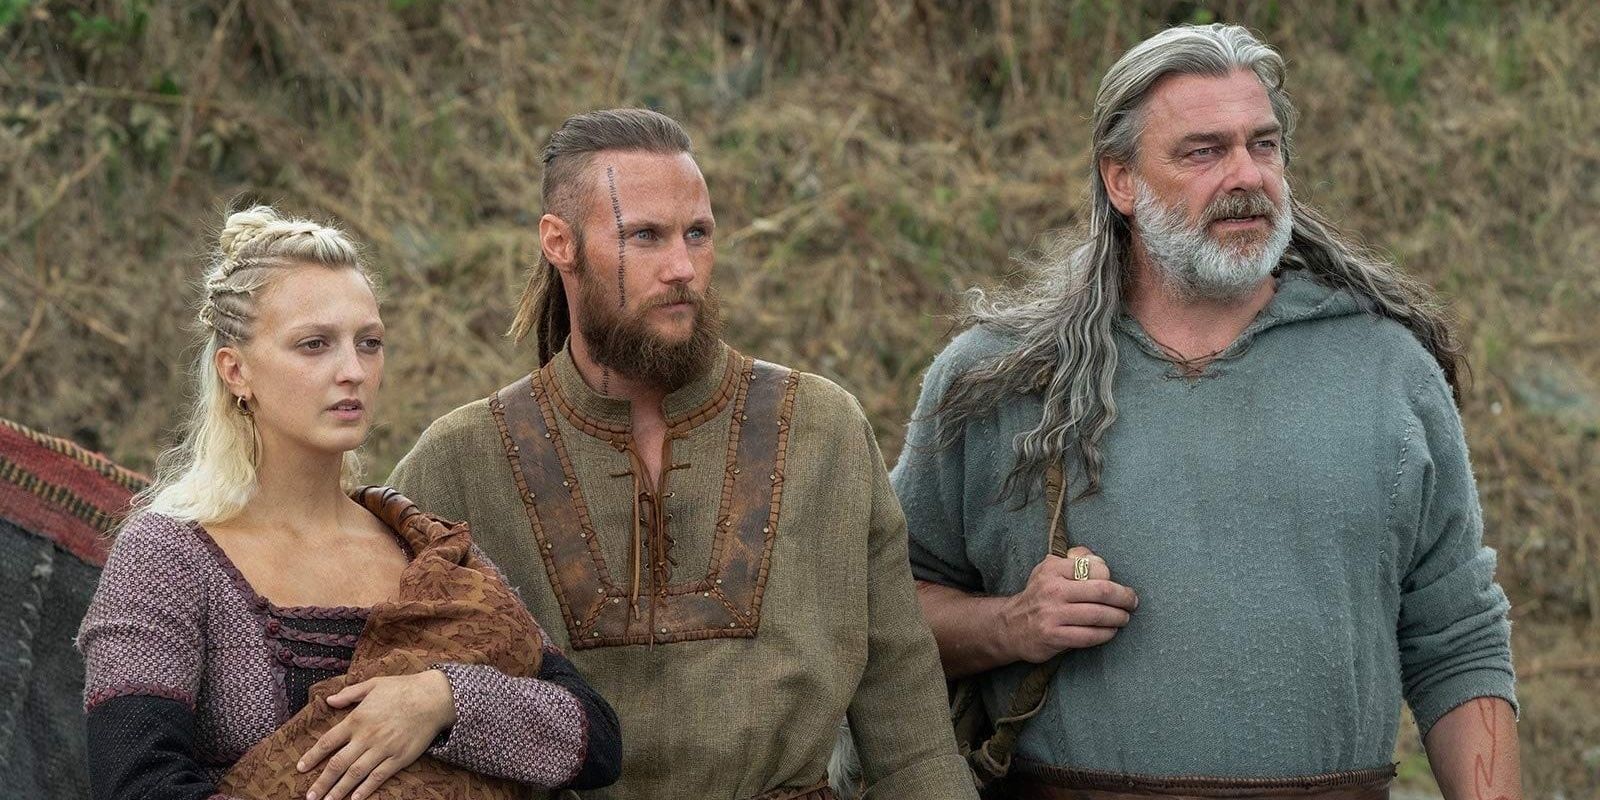 Ubbe, Torvi, and Othere in America in Vikings